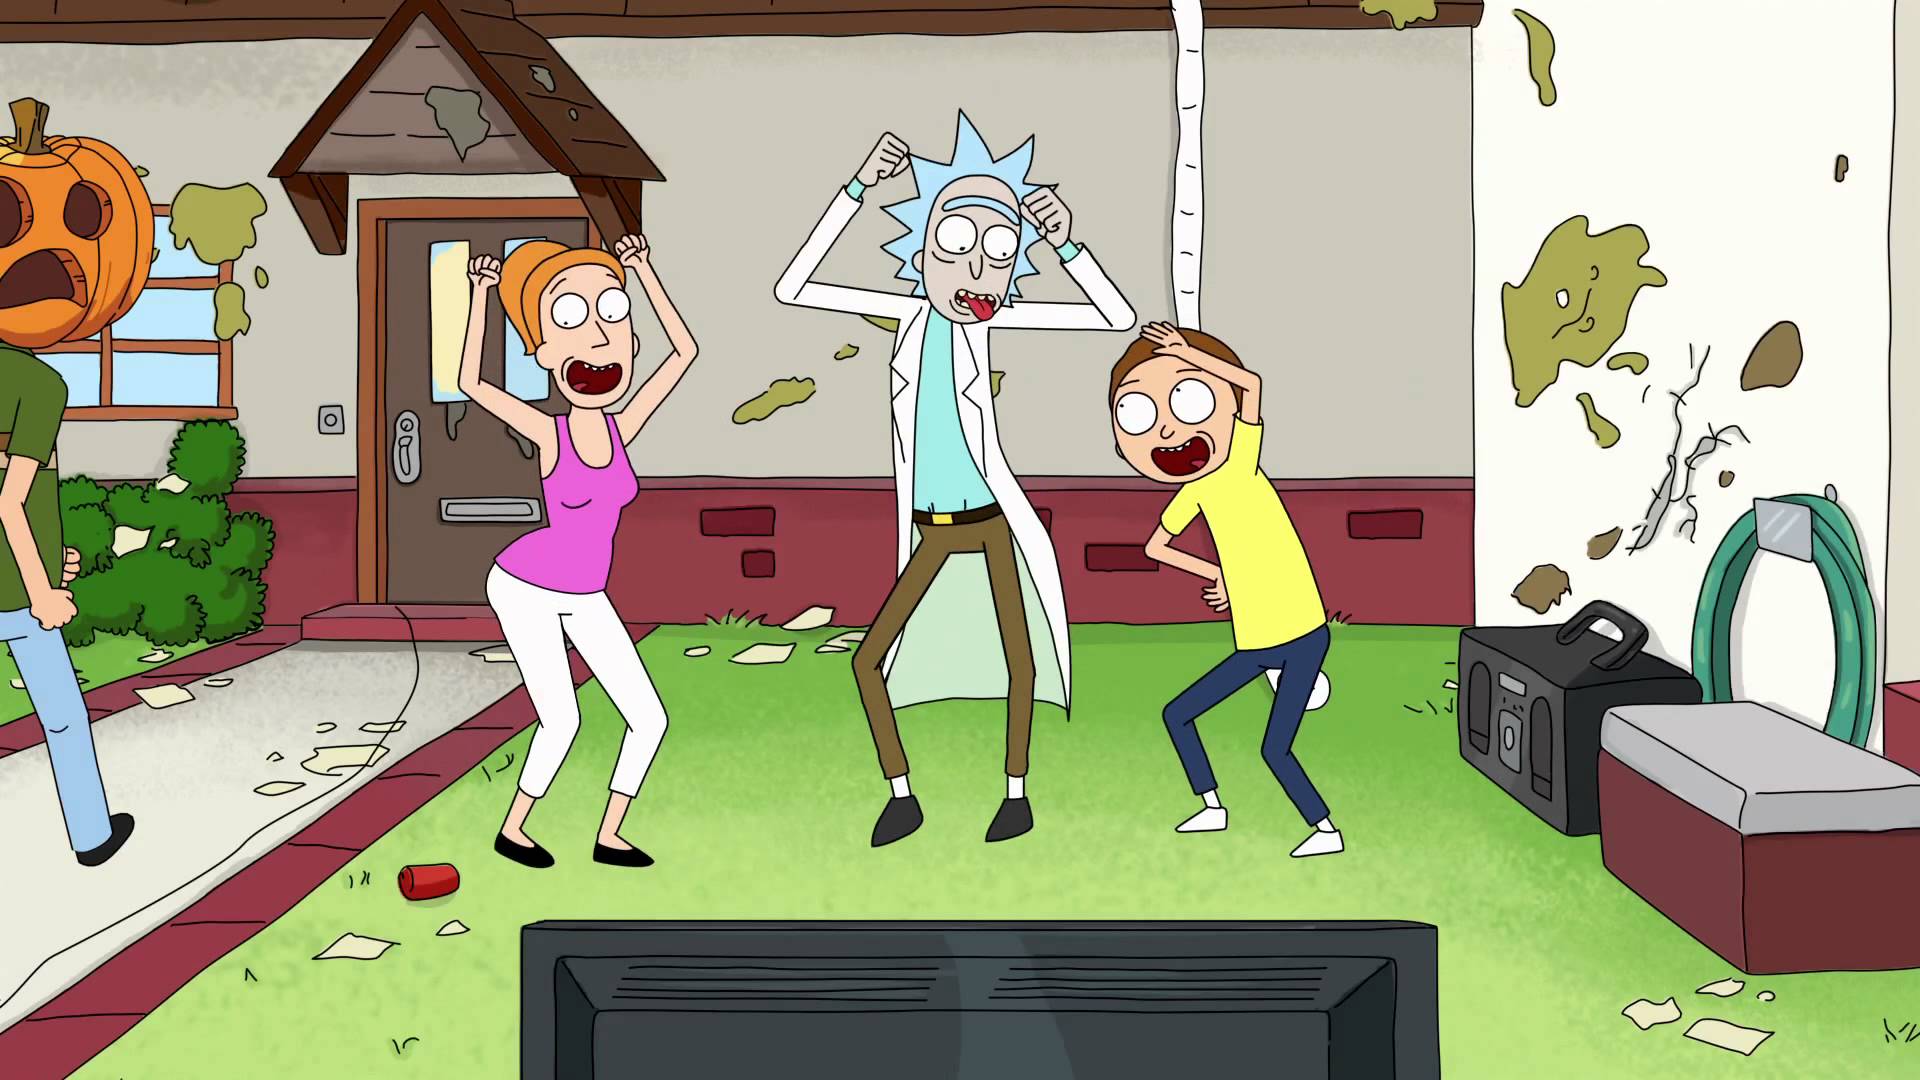 rick and morty, jerry smith, tv show, morty smith, rick sanchez, summer smith phone wallpaper